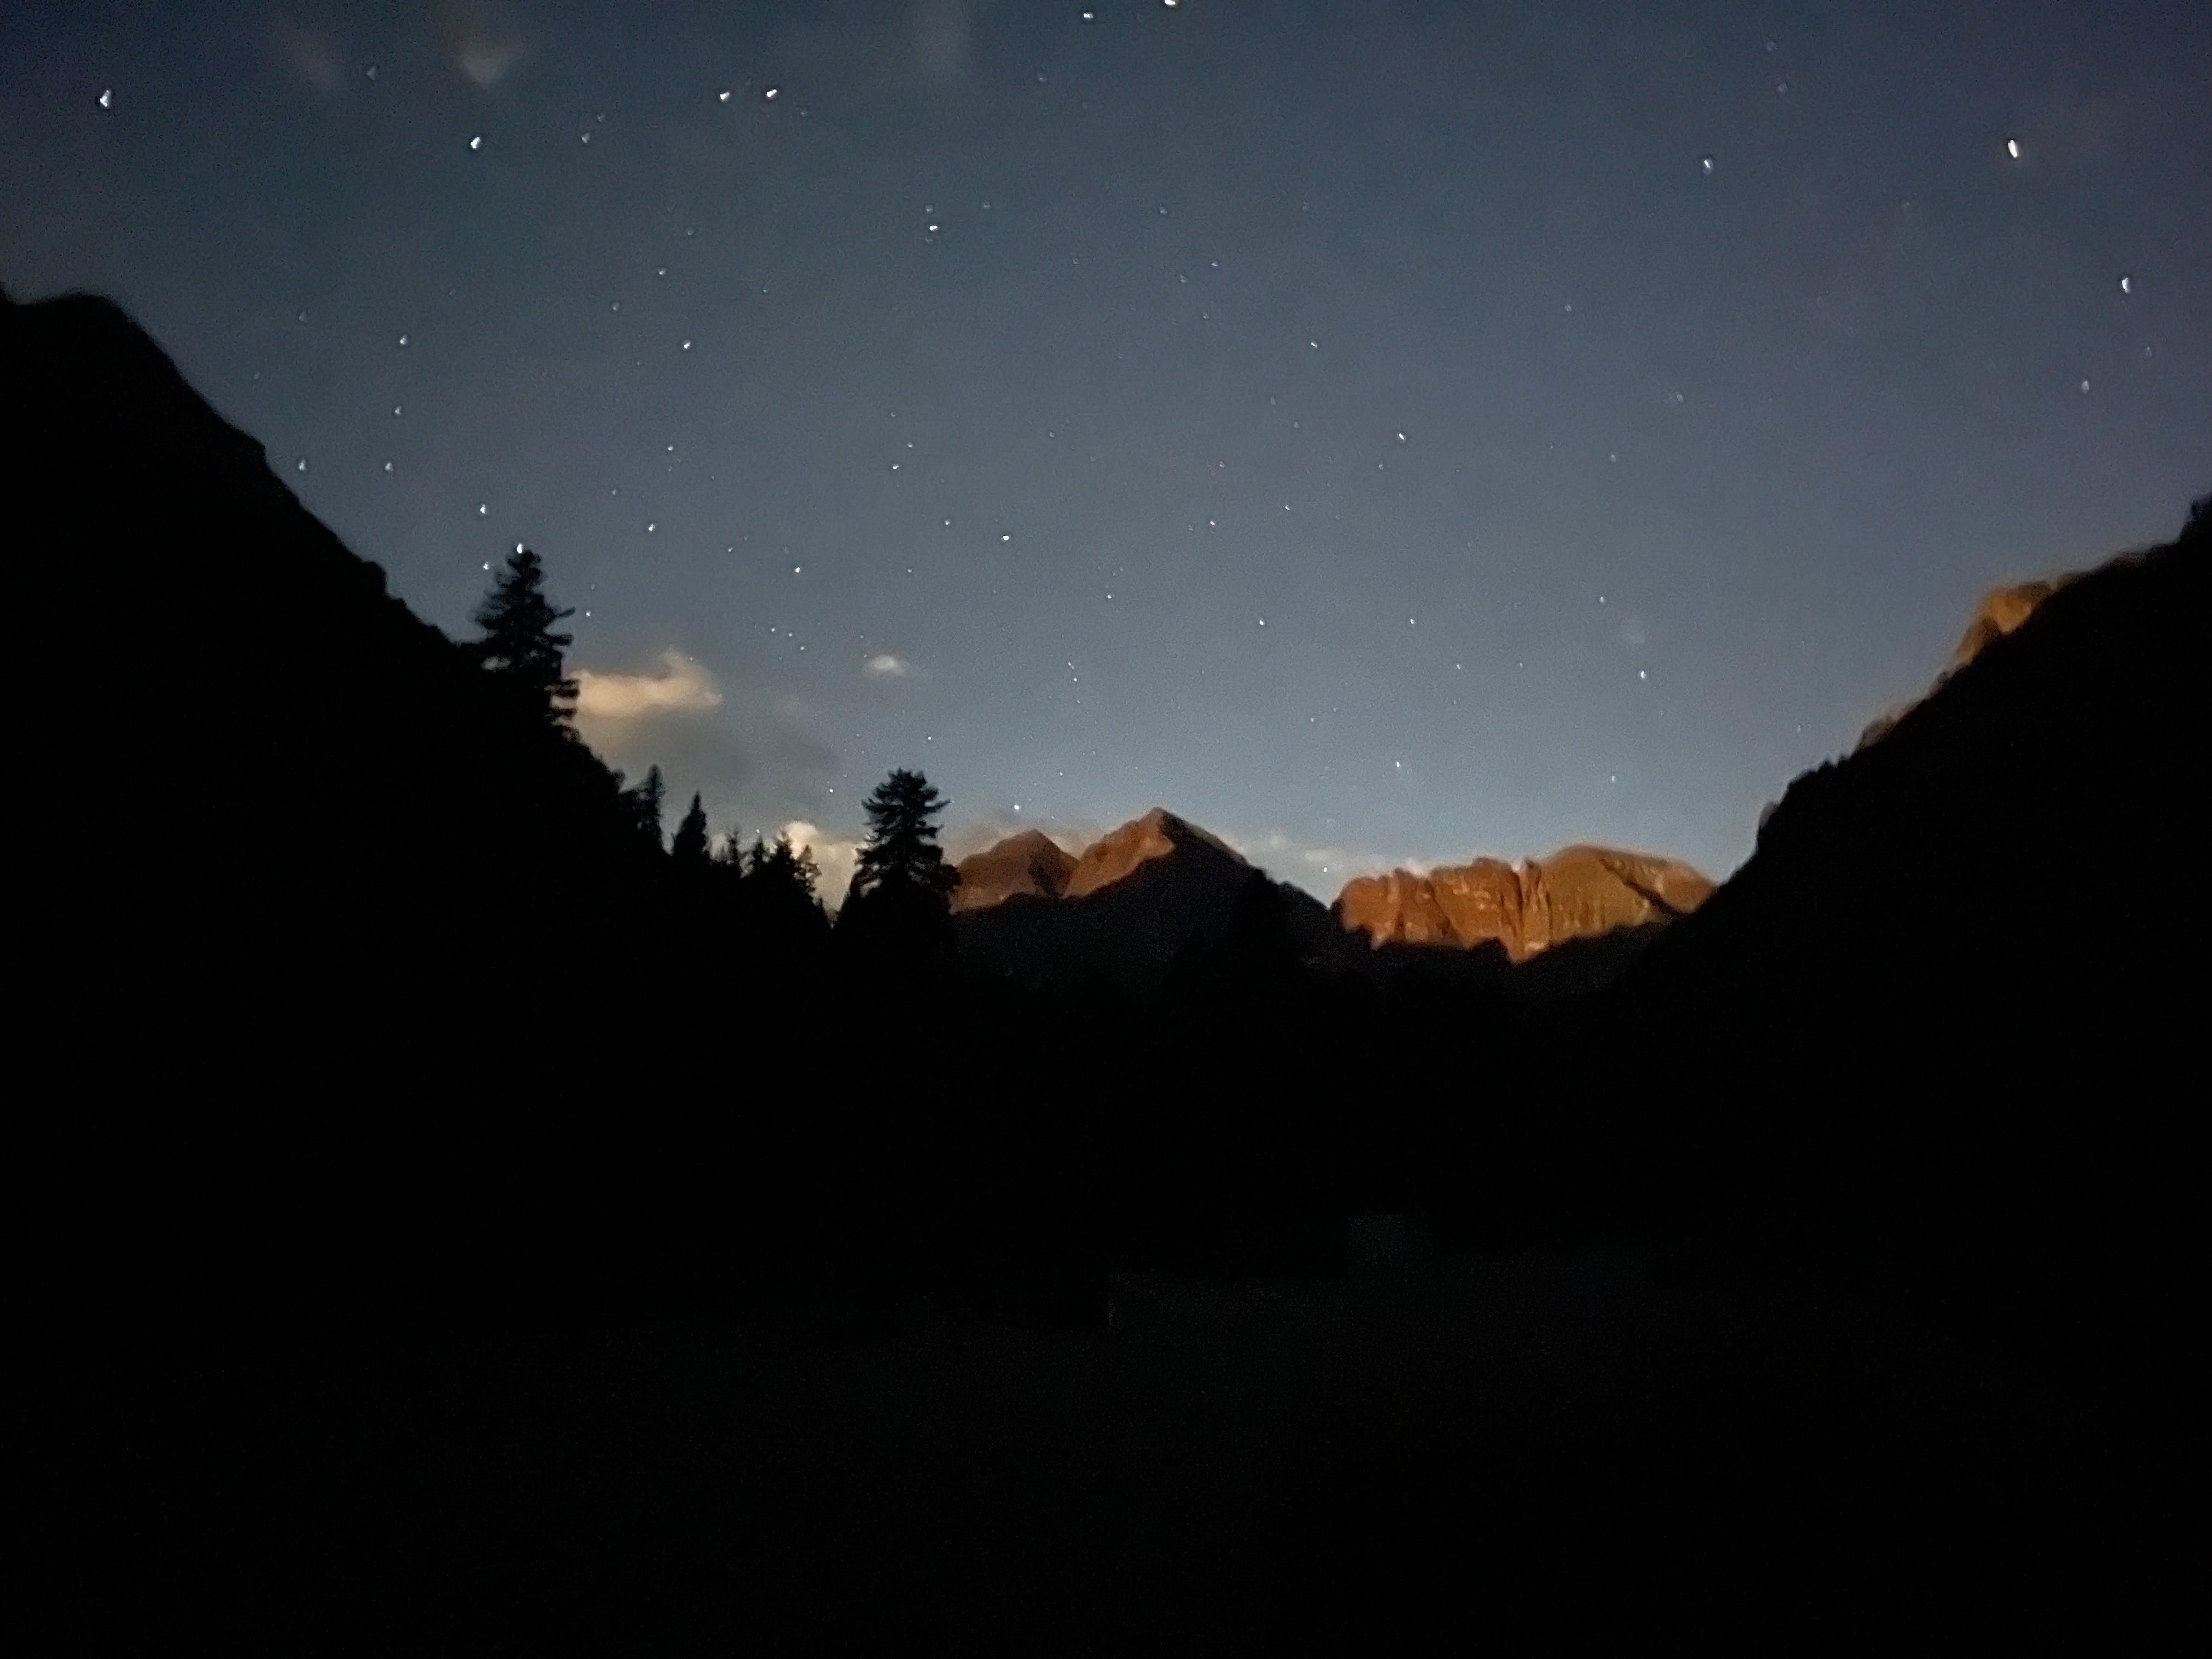 Camper submitted image from Maroon Bells Amphitheatre - 1